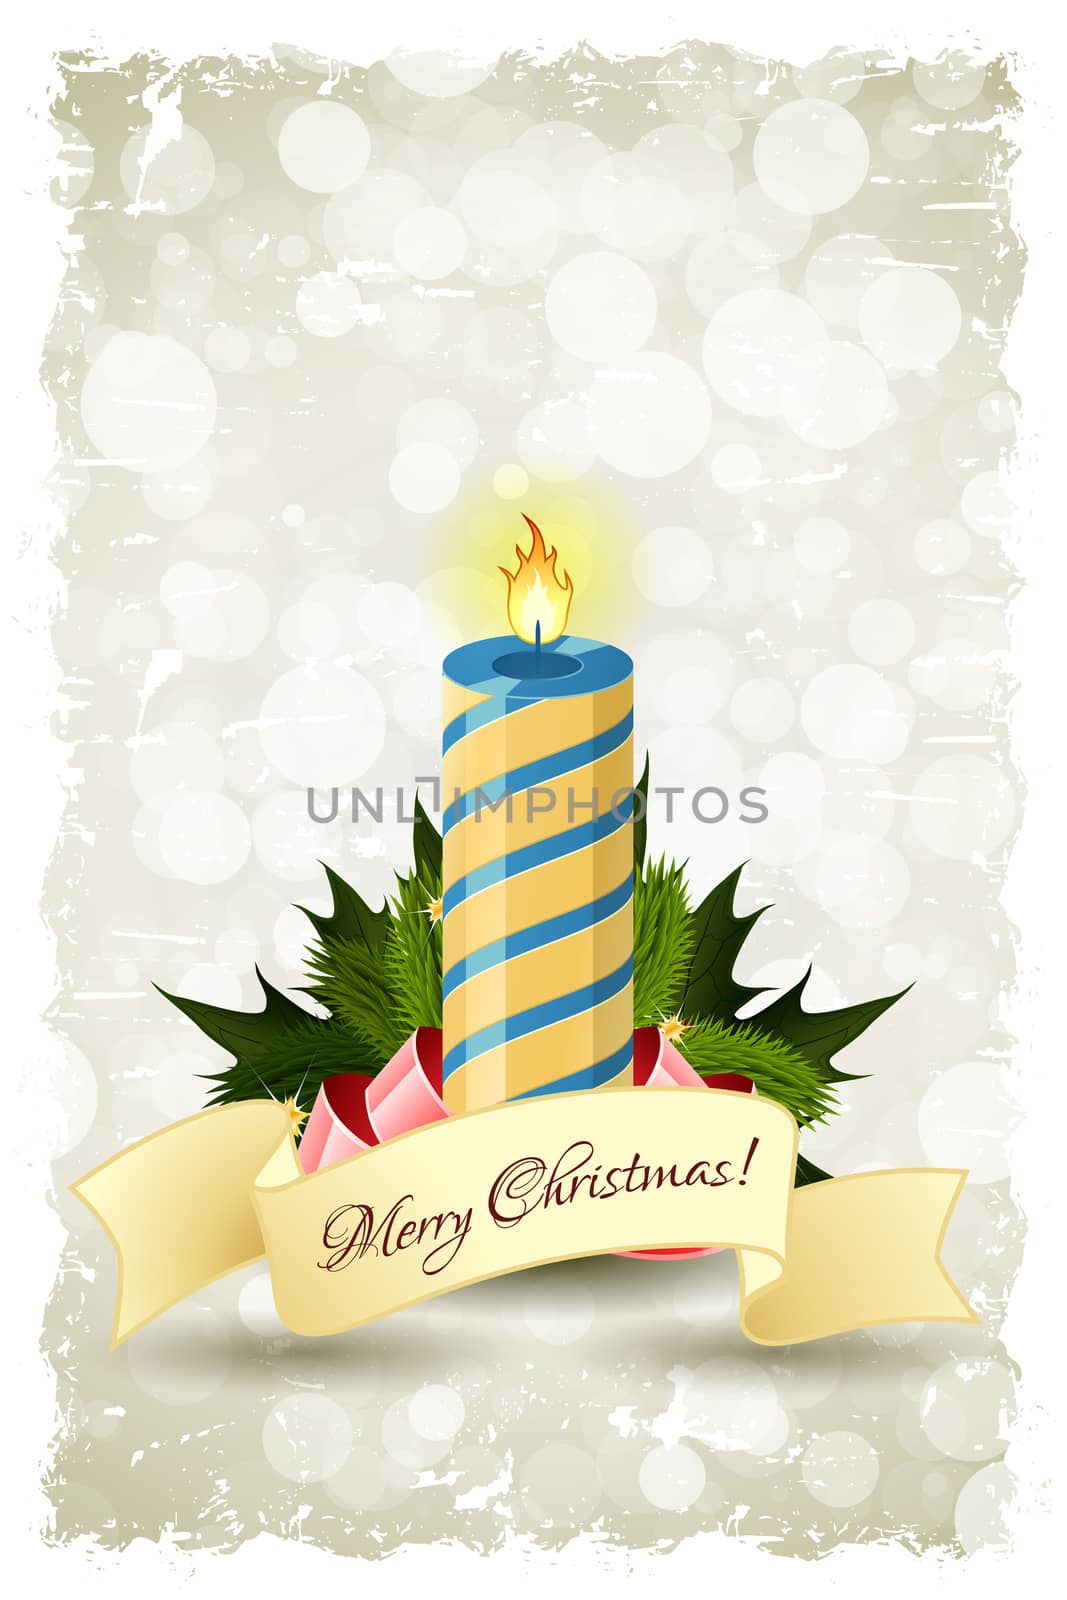 Christmas Greeting Card. Christmas Decorations and Candle